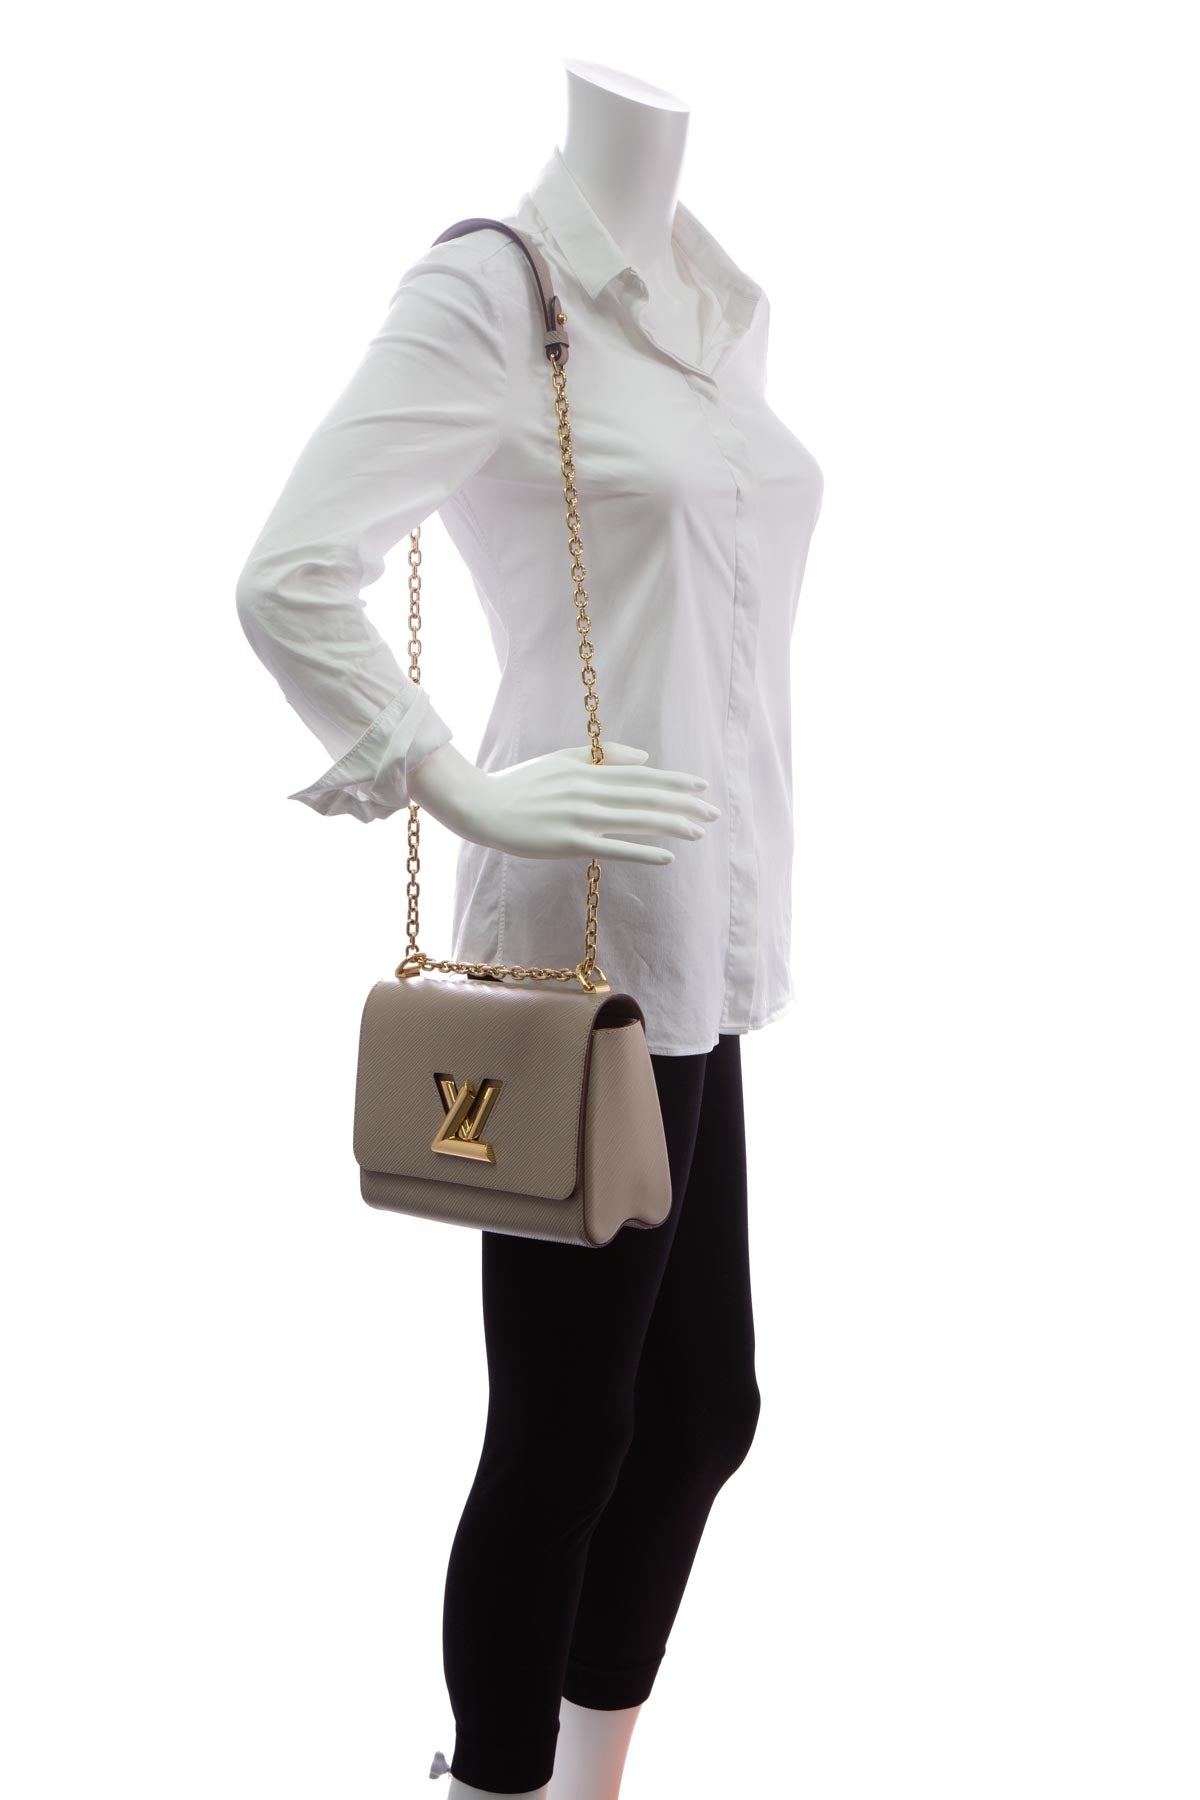 Louis Vuitton LOCKIT MM V.CA GALET Grey/Beige Leather Tote BRAND